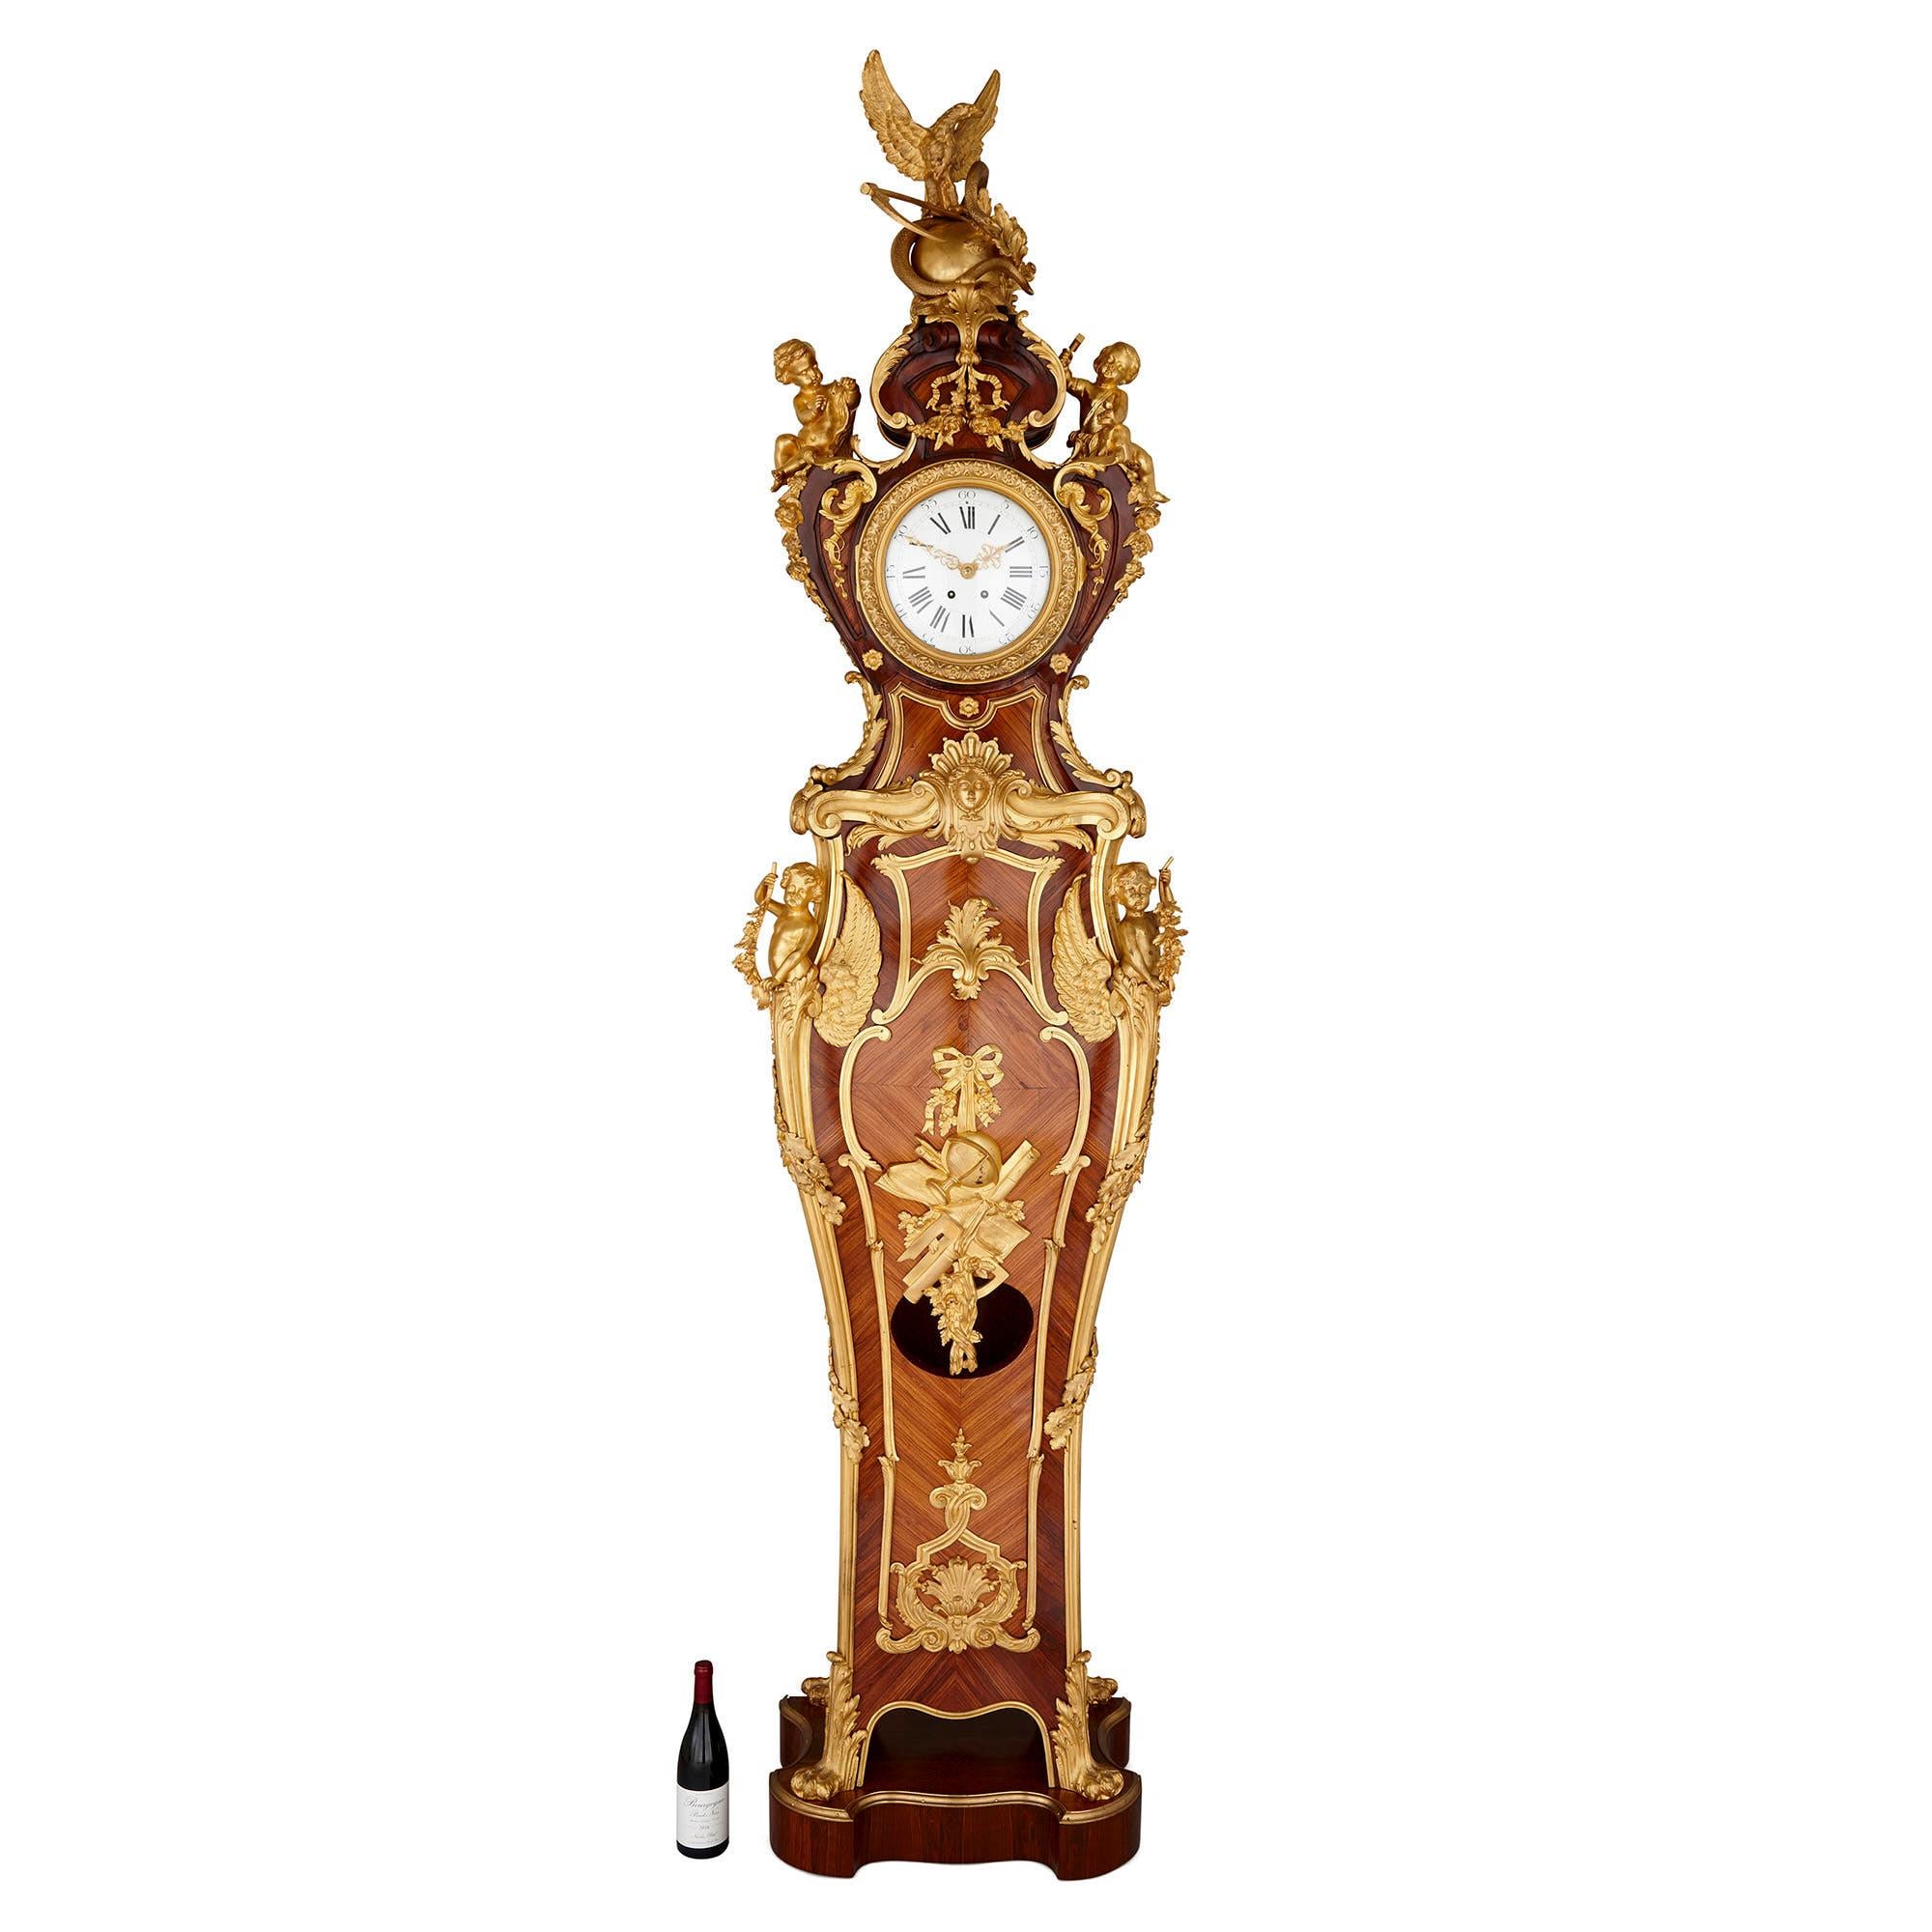 Gilt bronze and parquetry standing clock by Kahn in the Régence style
French, early 20th century
Measures: Height 262cm, width 62cm, depth 17cm

This beautiful longcase clock is of elongated violin body form. The wooden surfaces throughout are